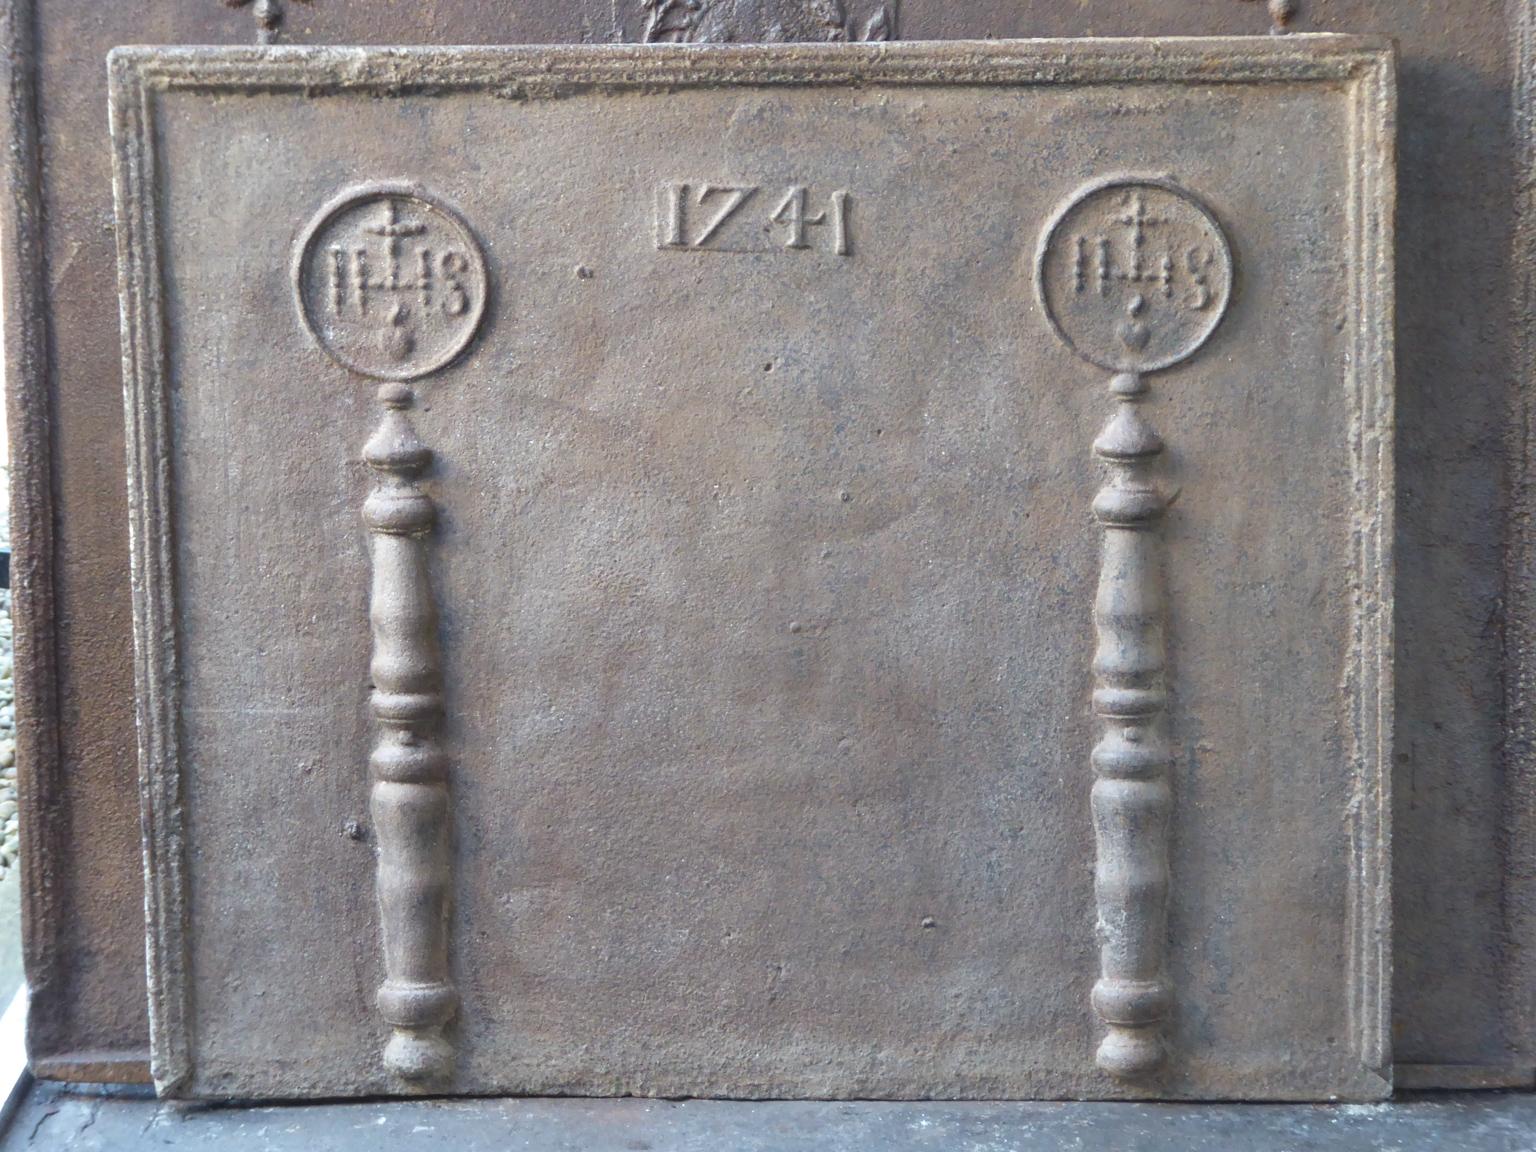 18th century Louis XIV French fireback with pillars, two IHS monograms, and the date of production 1741.

The monogram IHS stands for Iesus Hominum Salvator (Jesus the Savior of Humanity) or In Hoc Signo (In this sign will you win). The pillars